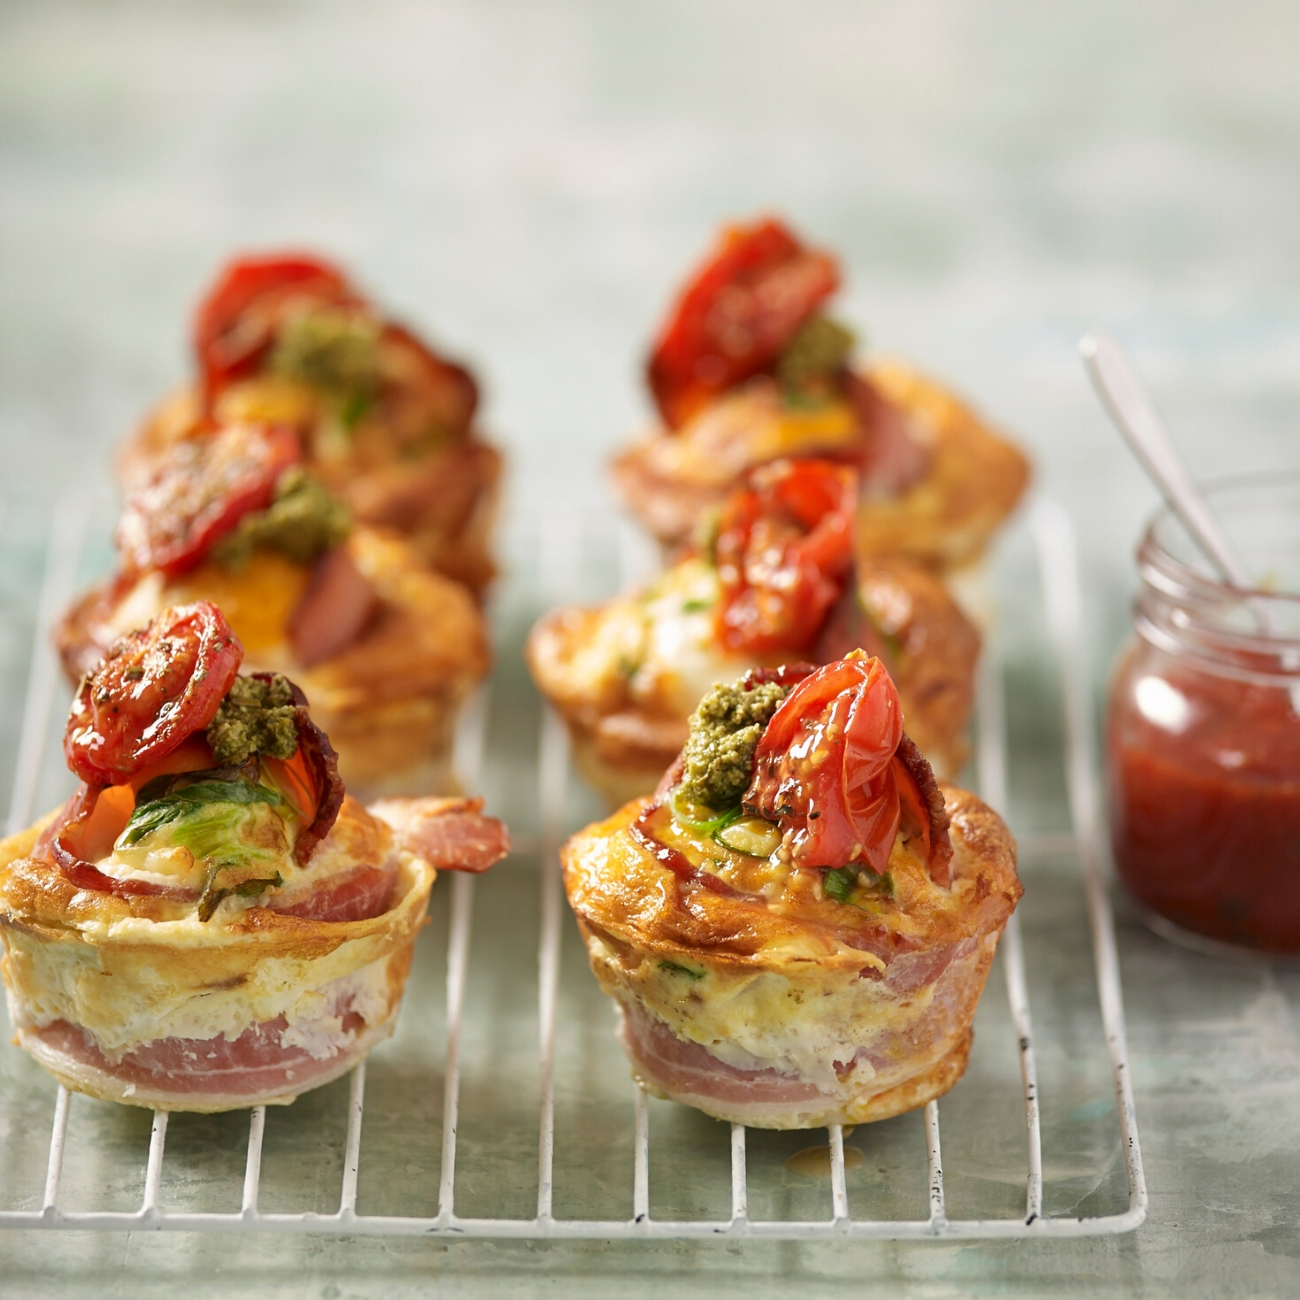 A delicious way to start the day: Mini Breakfast Frittatas